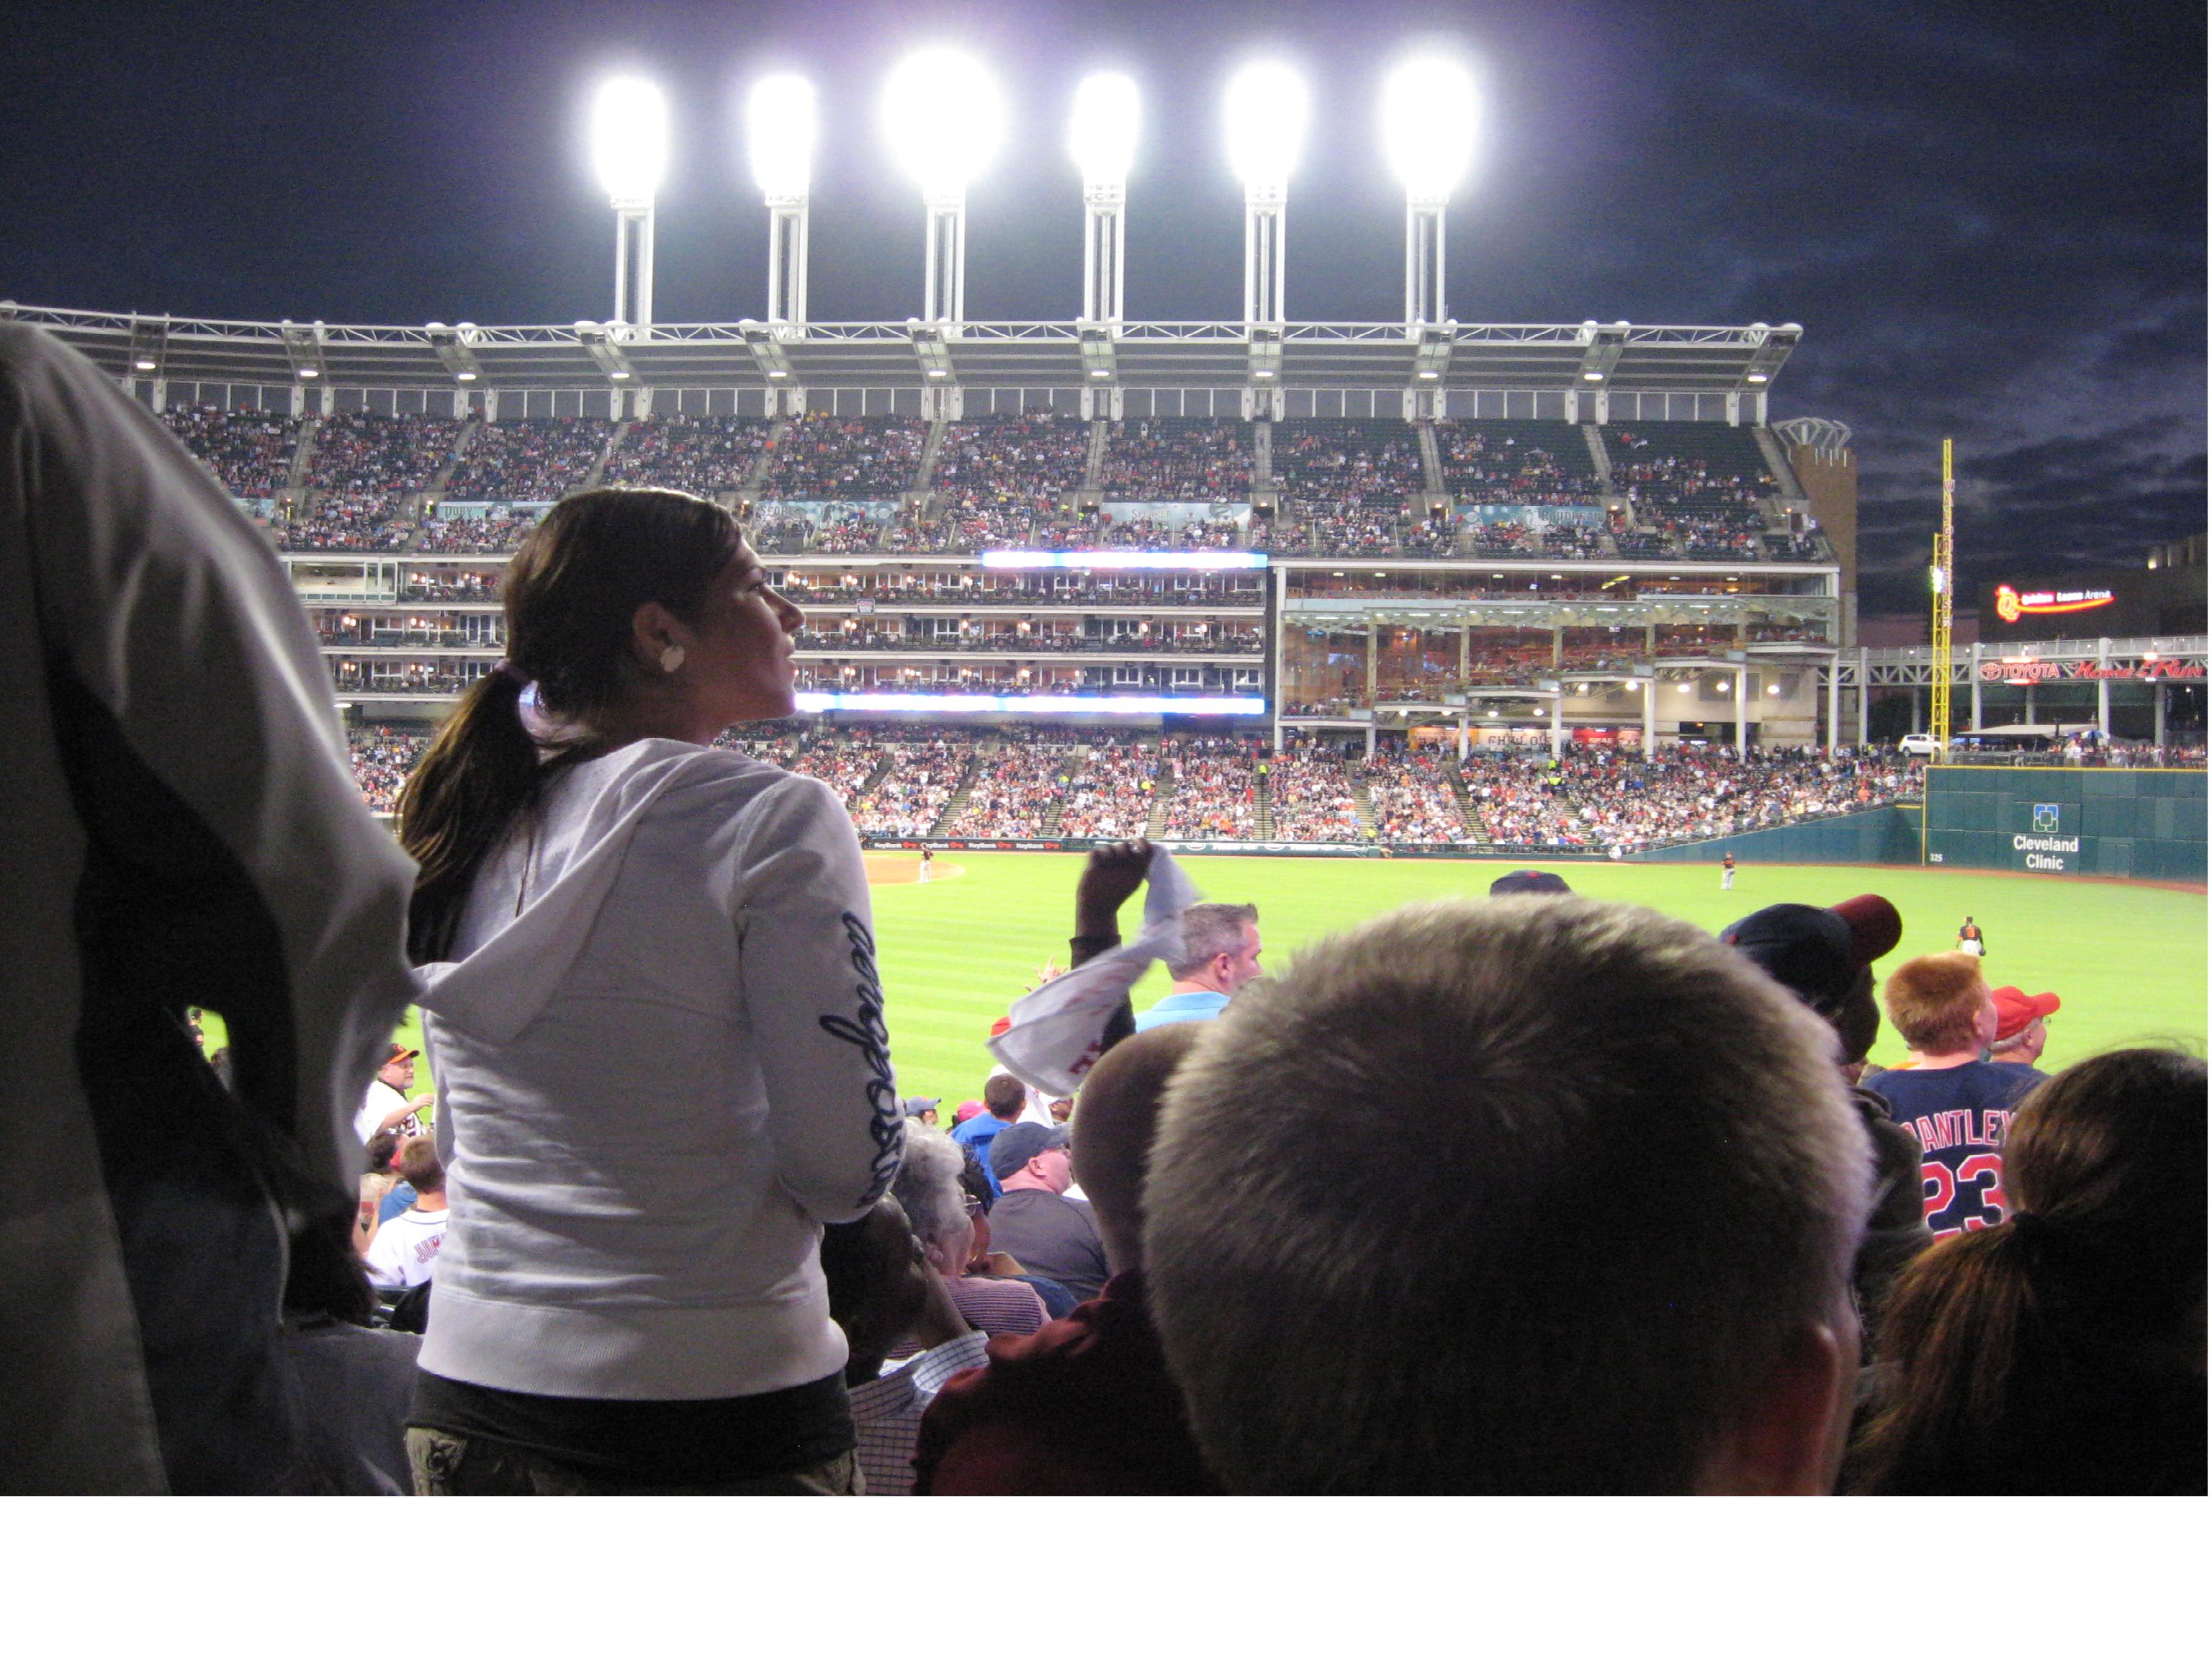  'Take me out the ballgame' - Ride the Rapid to see the 2015 Indians